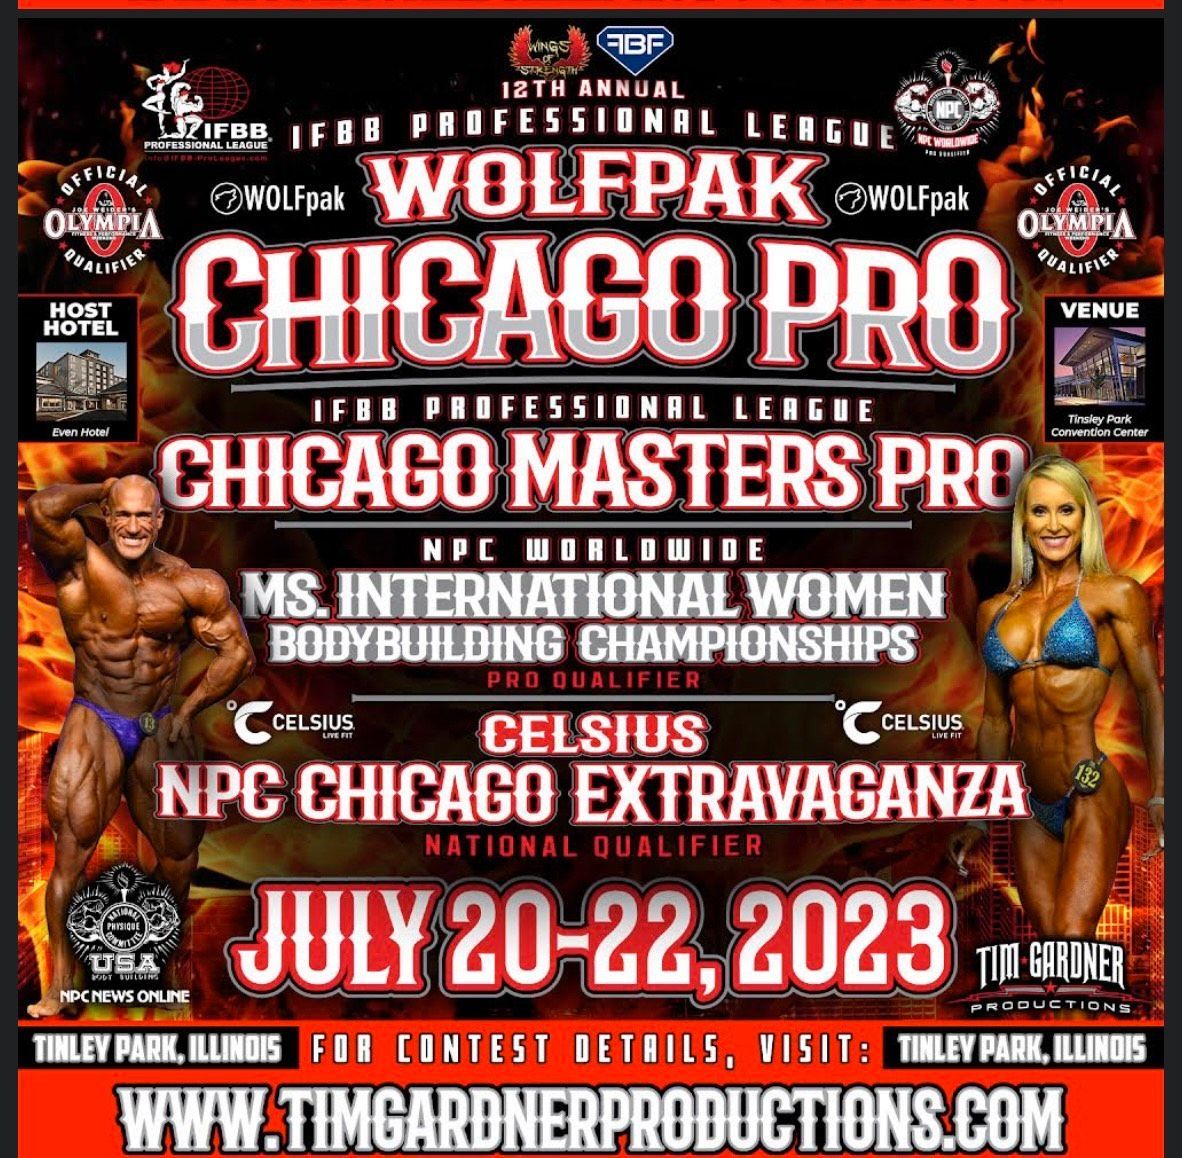 A poster for the wolfpak chicago pro professional league.